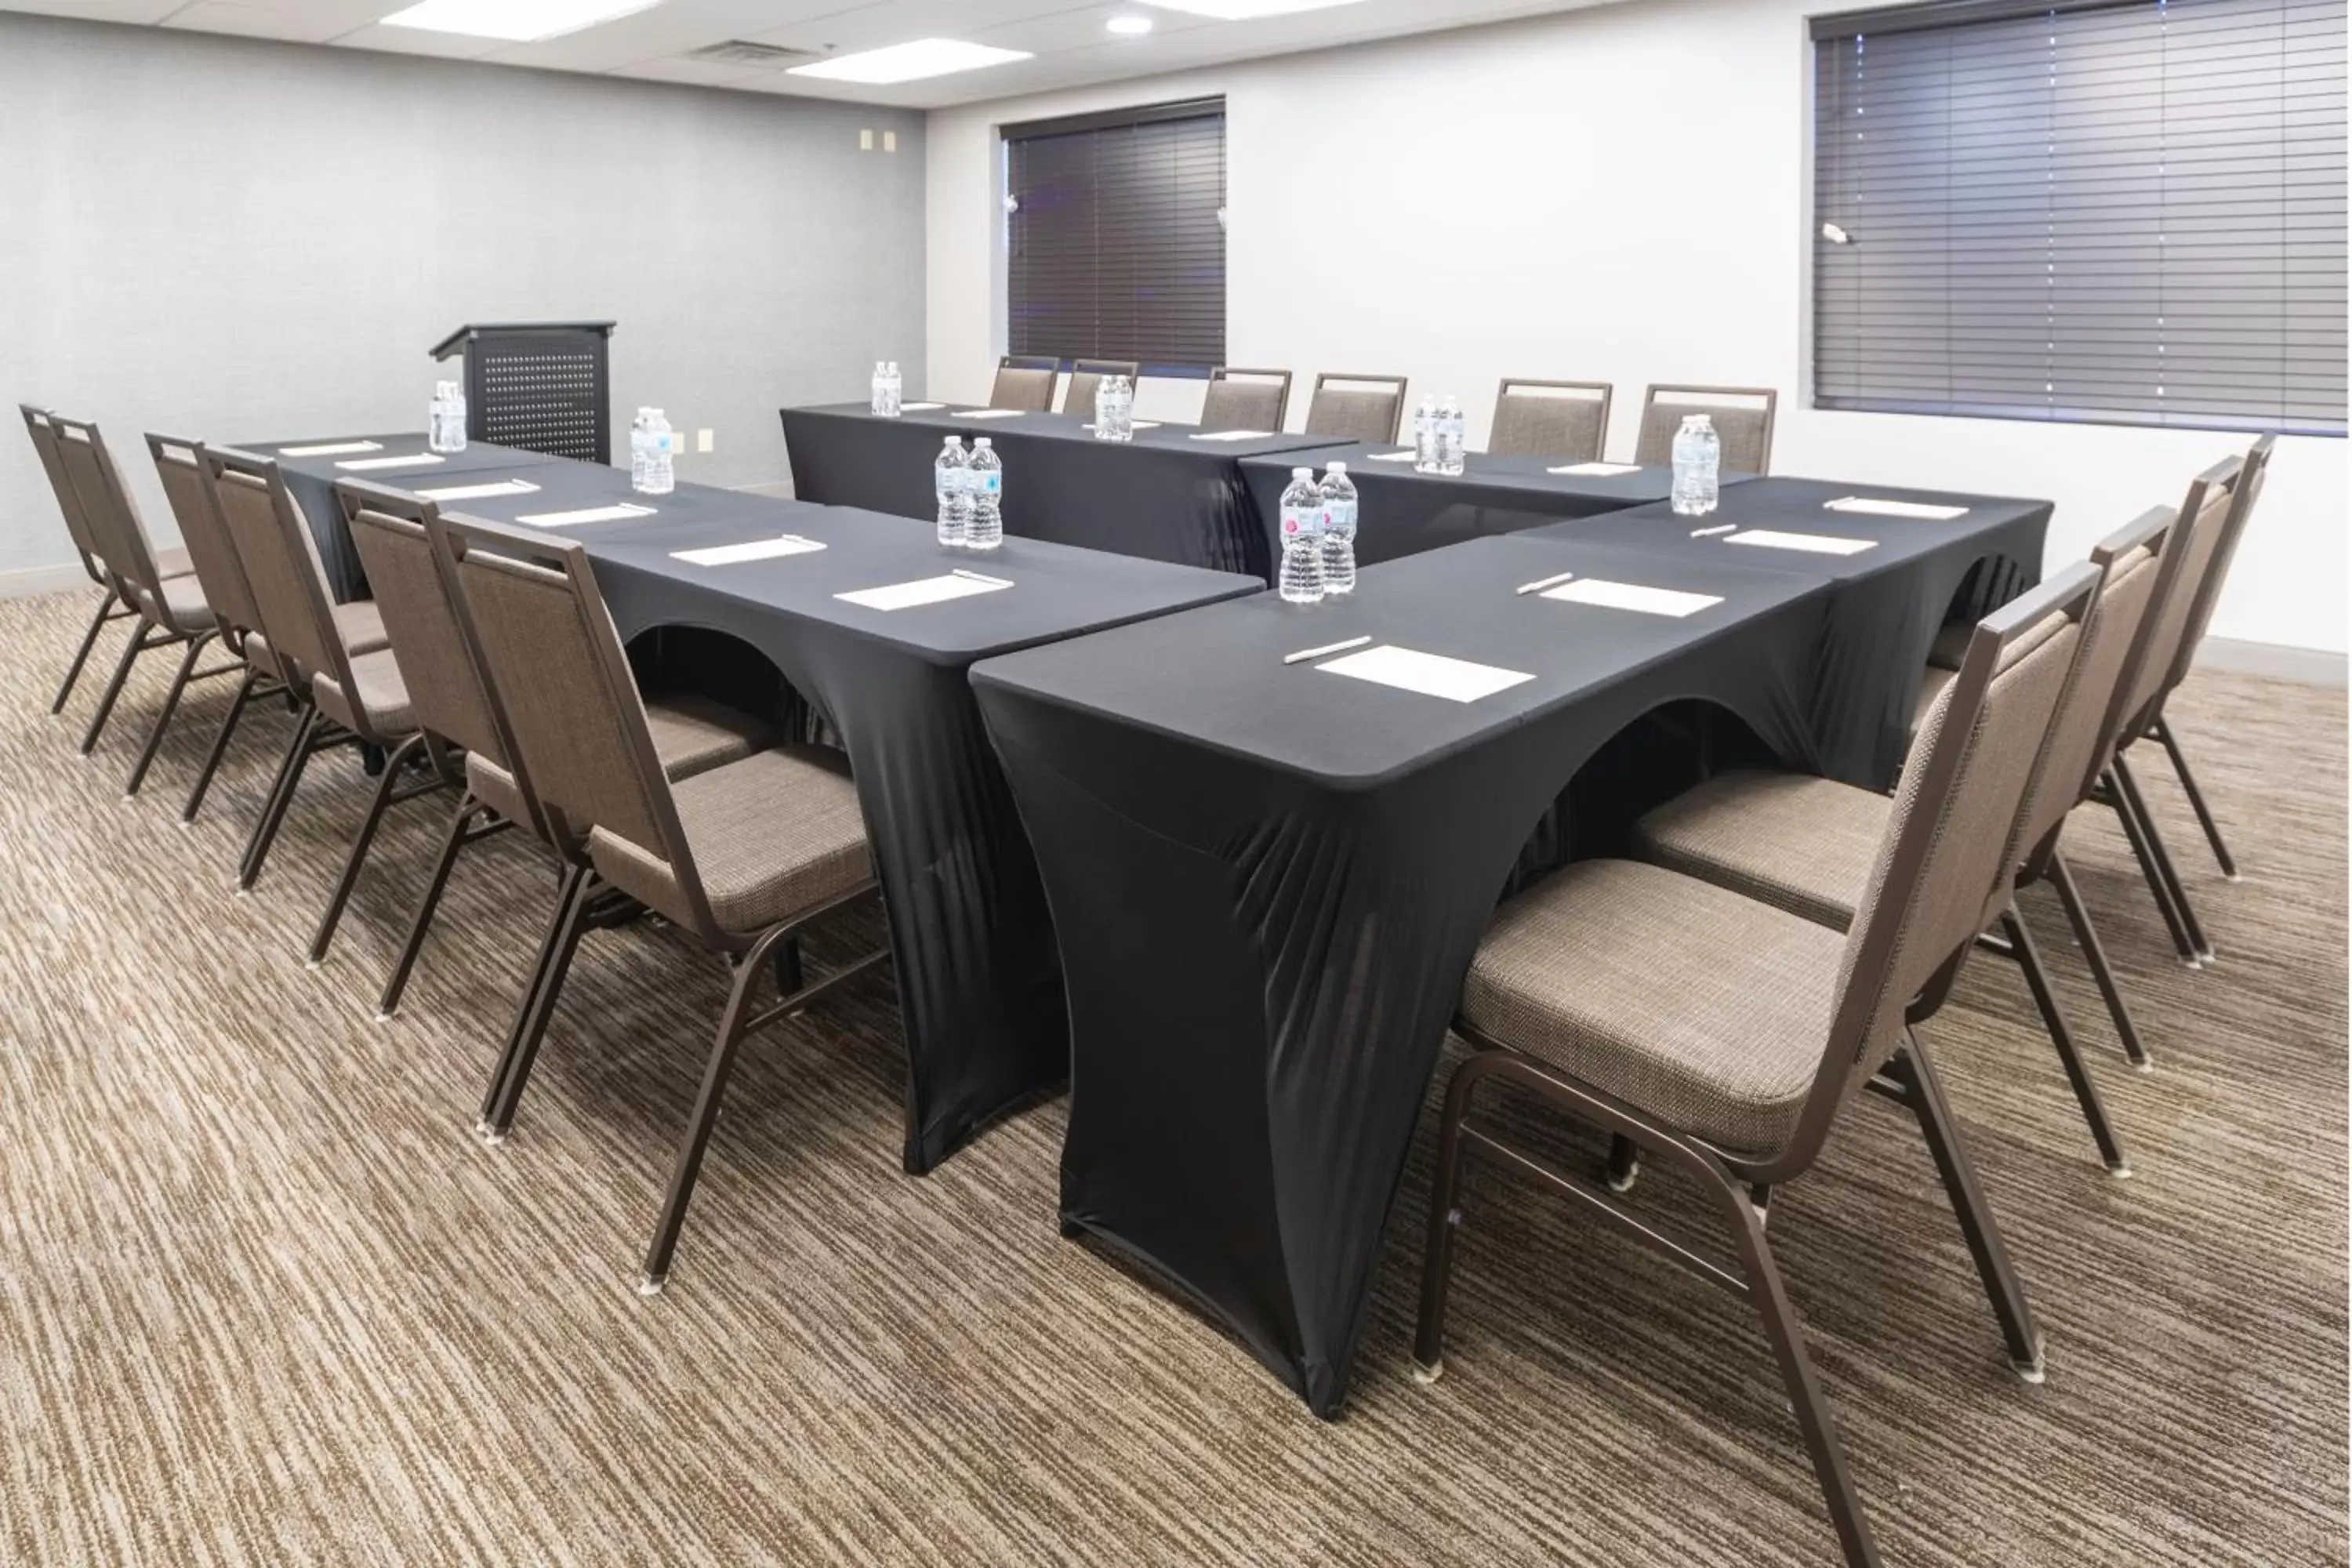 Meeting/conference room in Country Inn & Suites by Radisson, Stone Mountain, GA